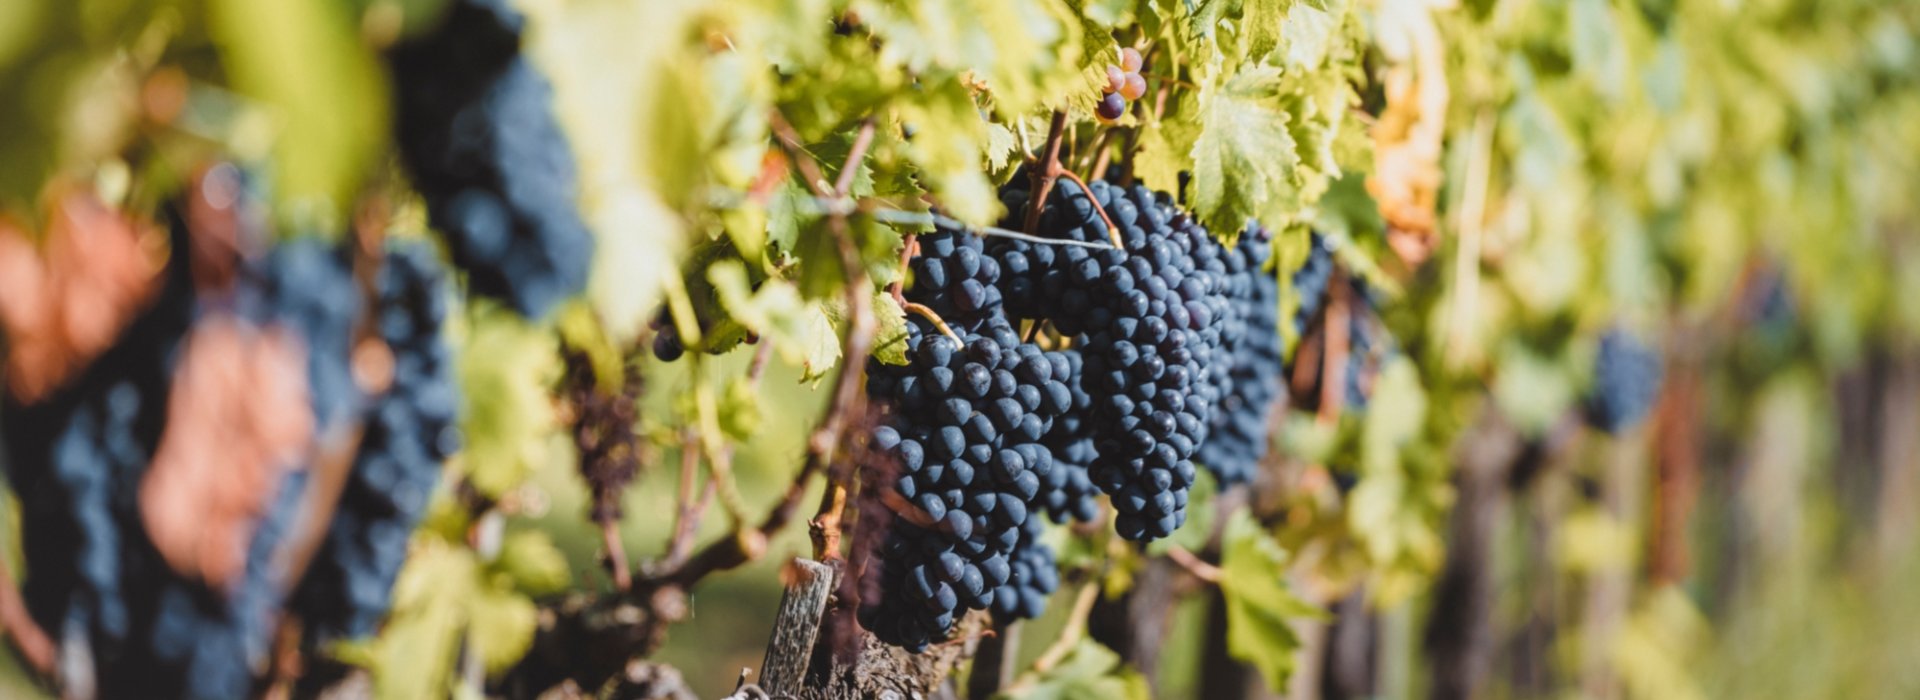 Visit two wineries producing the famous Brunello di Montalcino with tasting